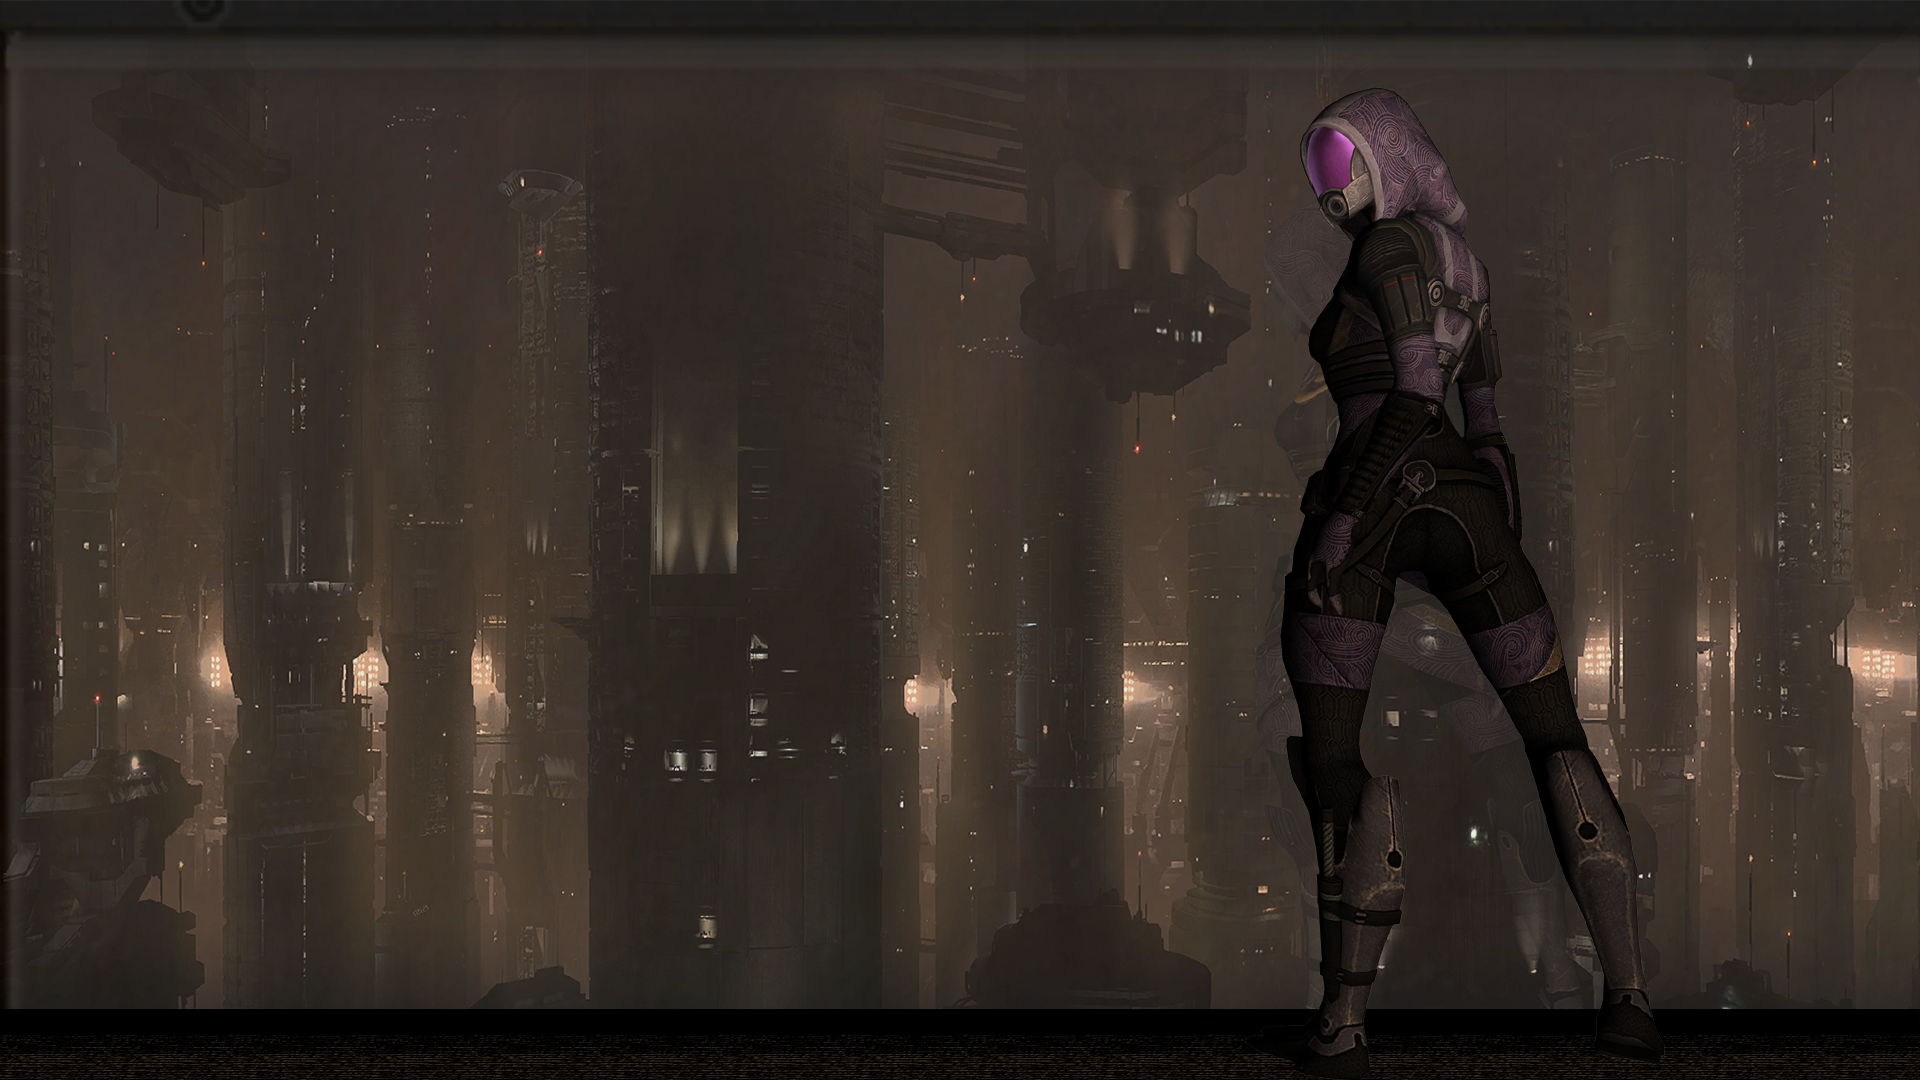 tali___omega_by_j4n3m3-d3hptuo.png